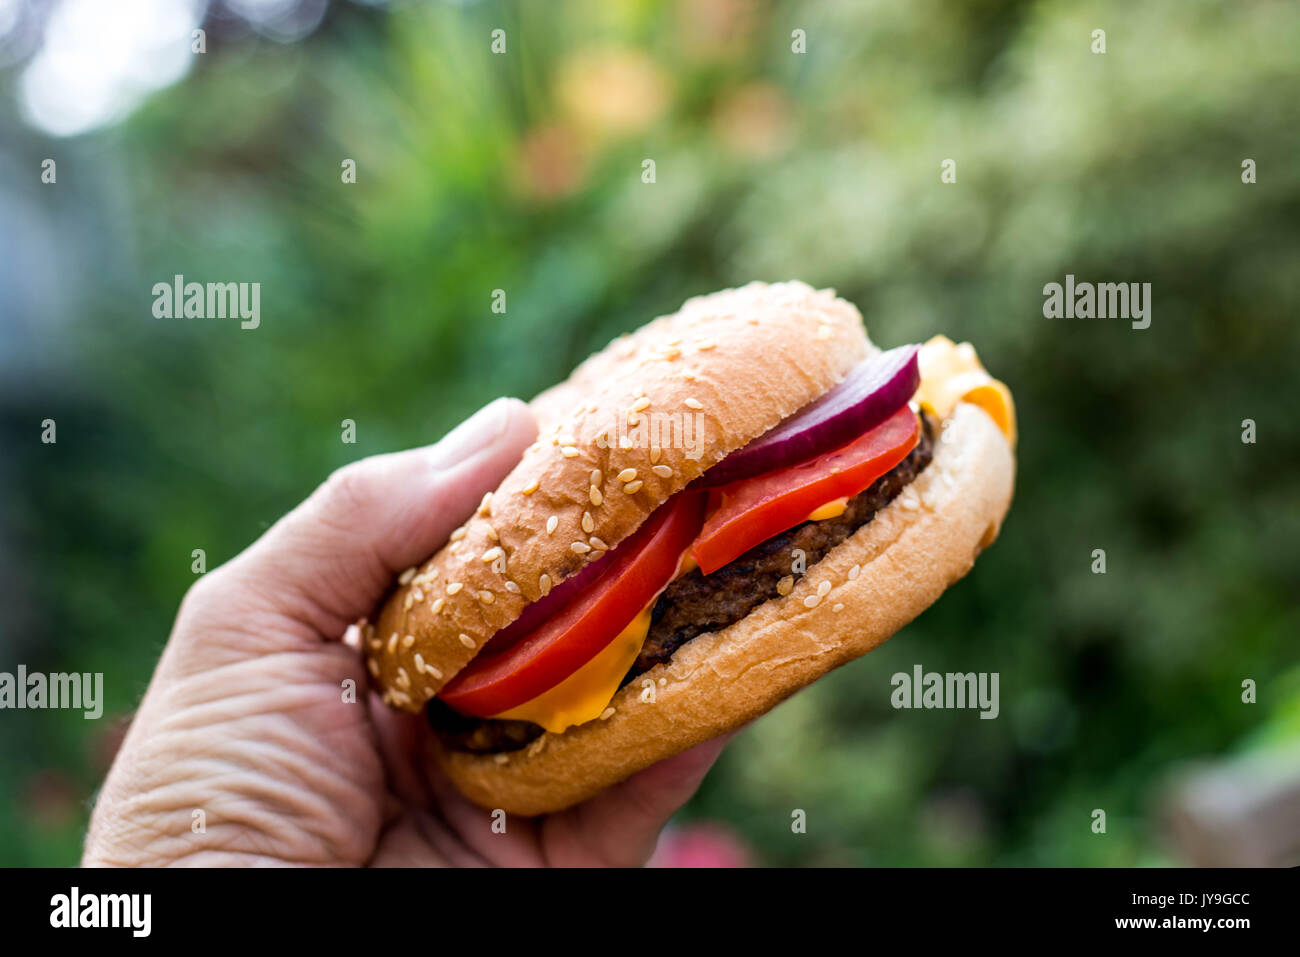 Holding A Quarter Pound Hamburger or Beefburger in a Seame Bread Bun With Salad Stock Photo